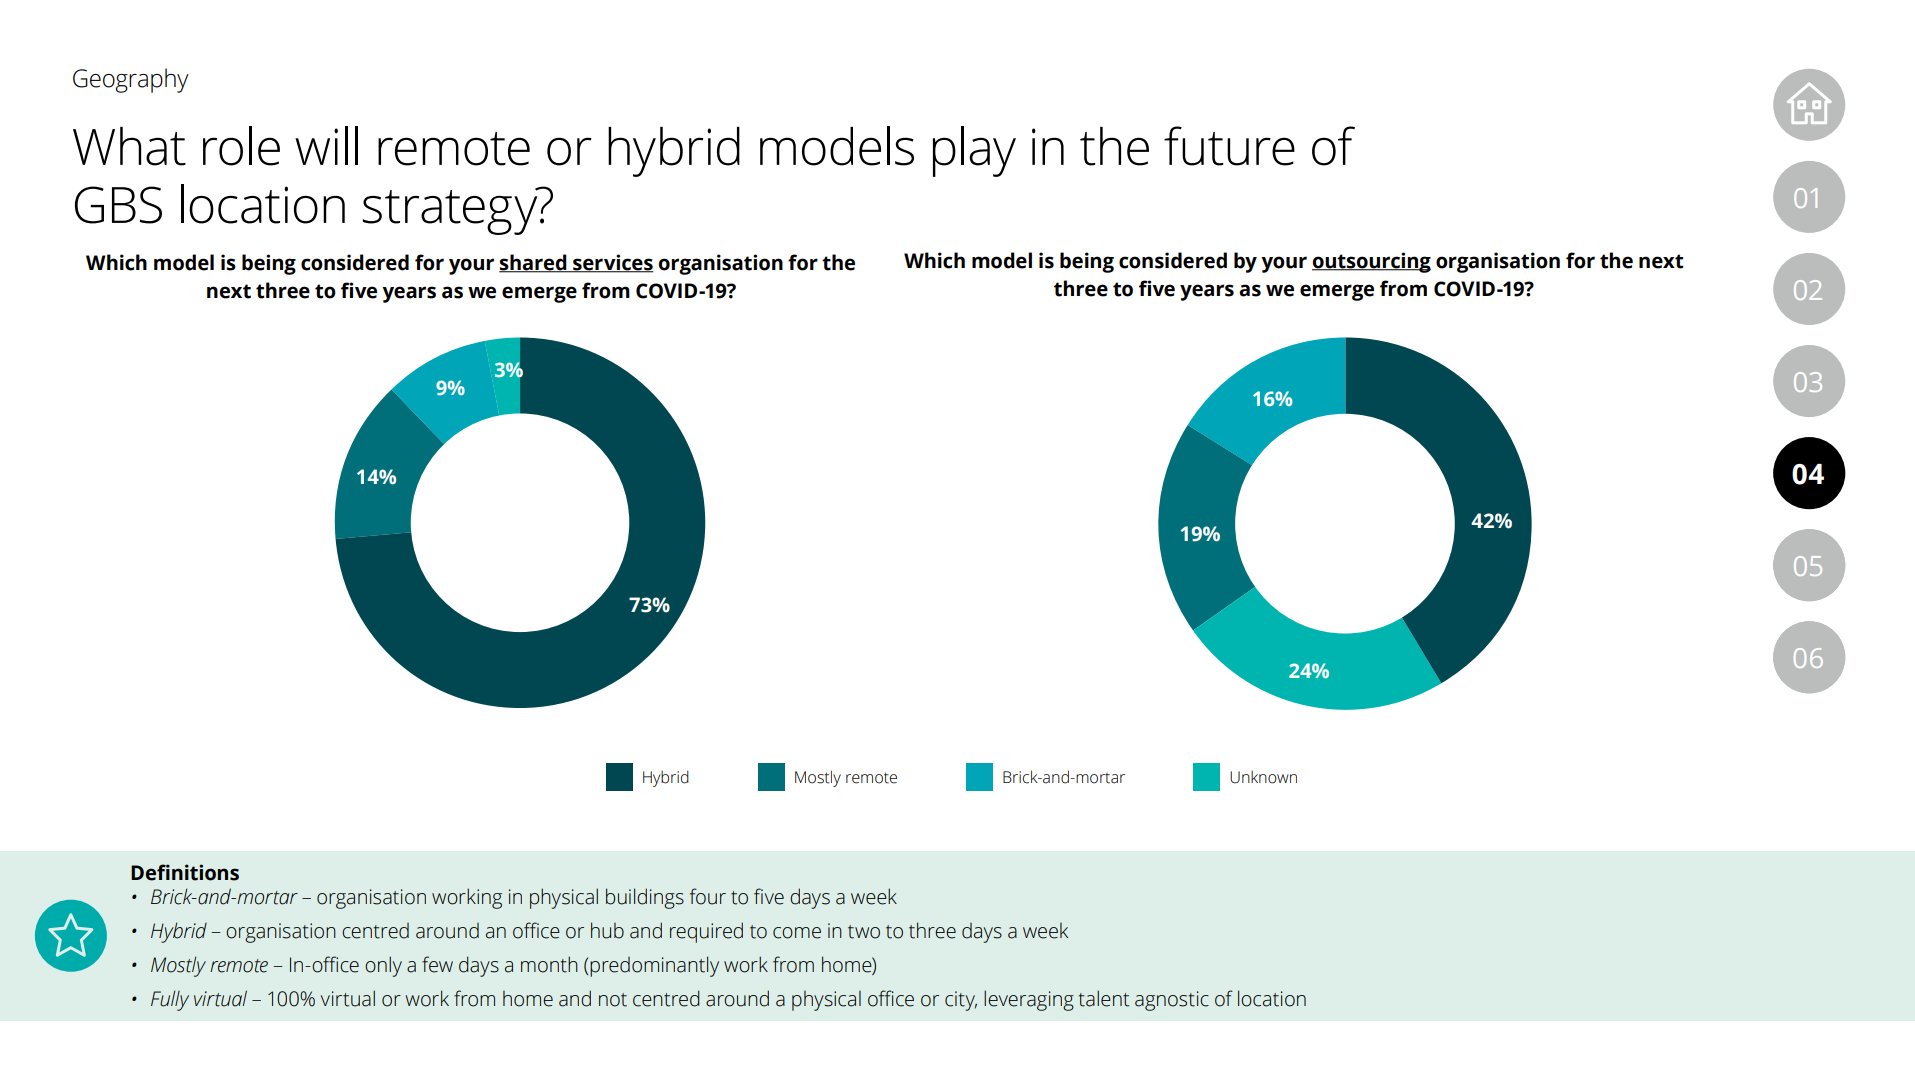 What role will remote or hybrid models play in the future of GBS location strategy?